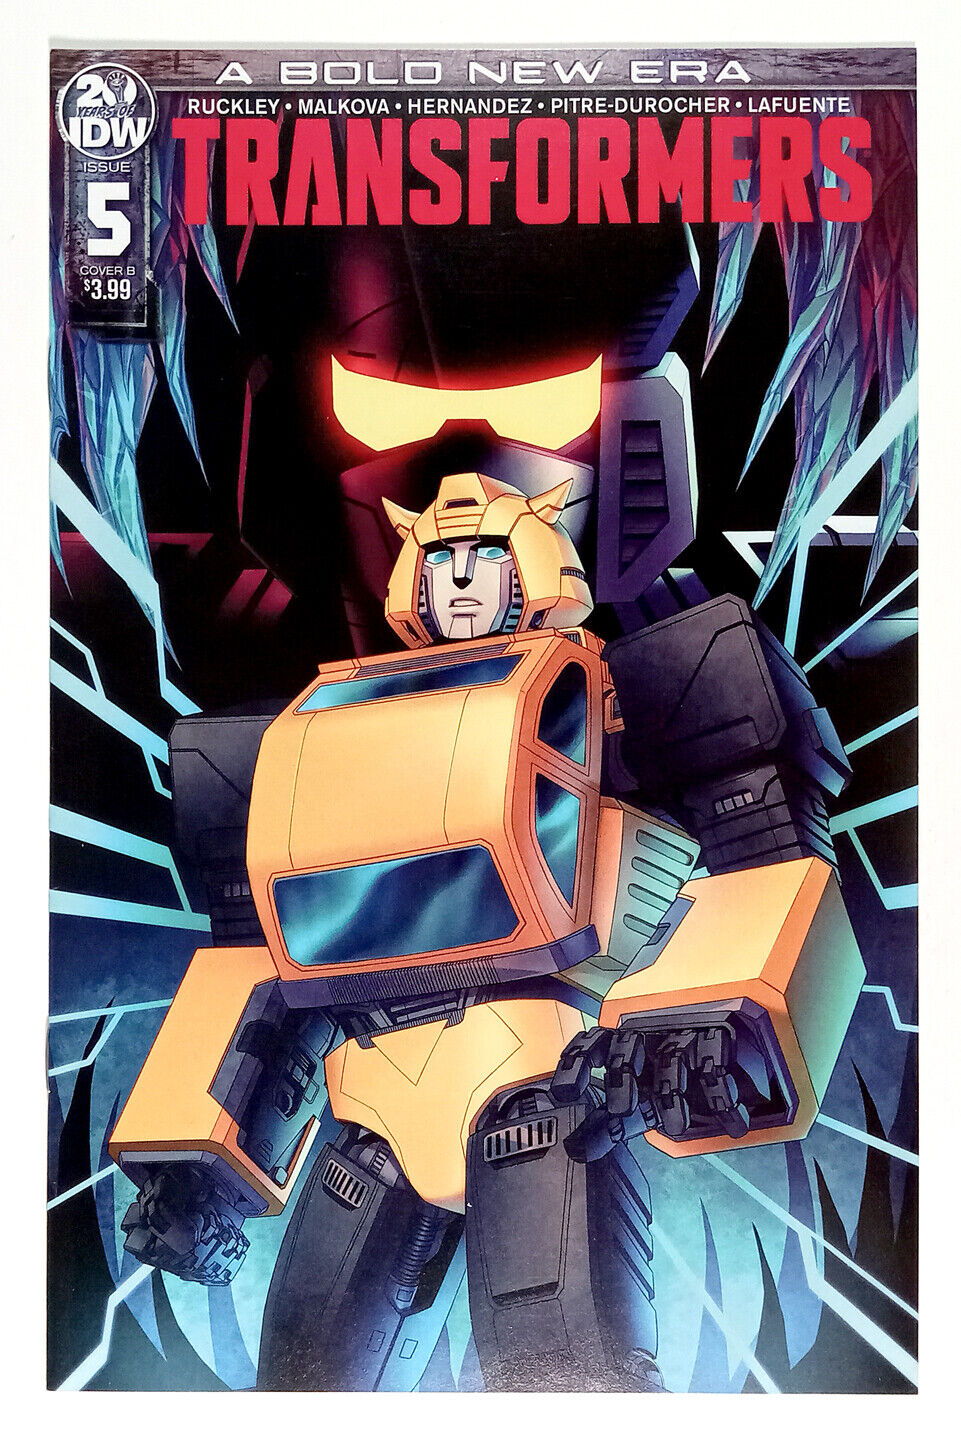 Transformers #1 - #23 (2019-) IDW Comics  Sold separately